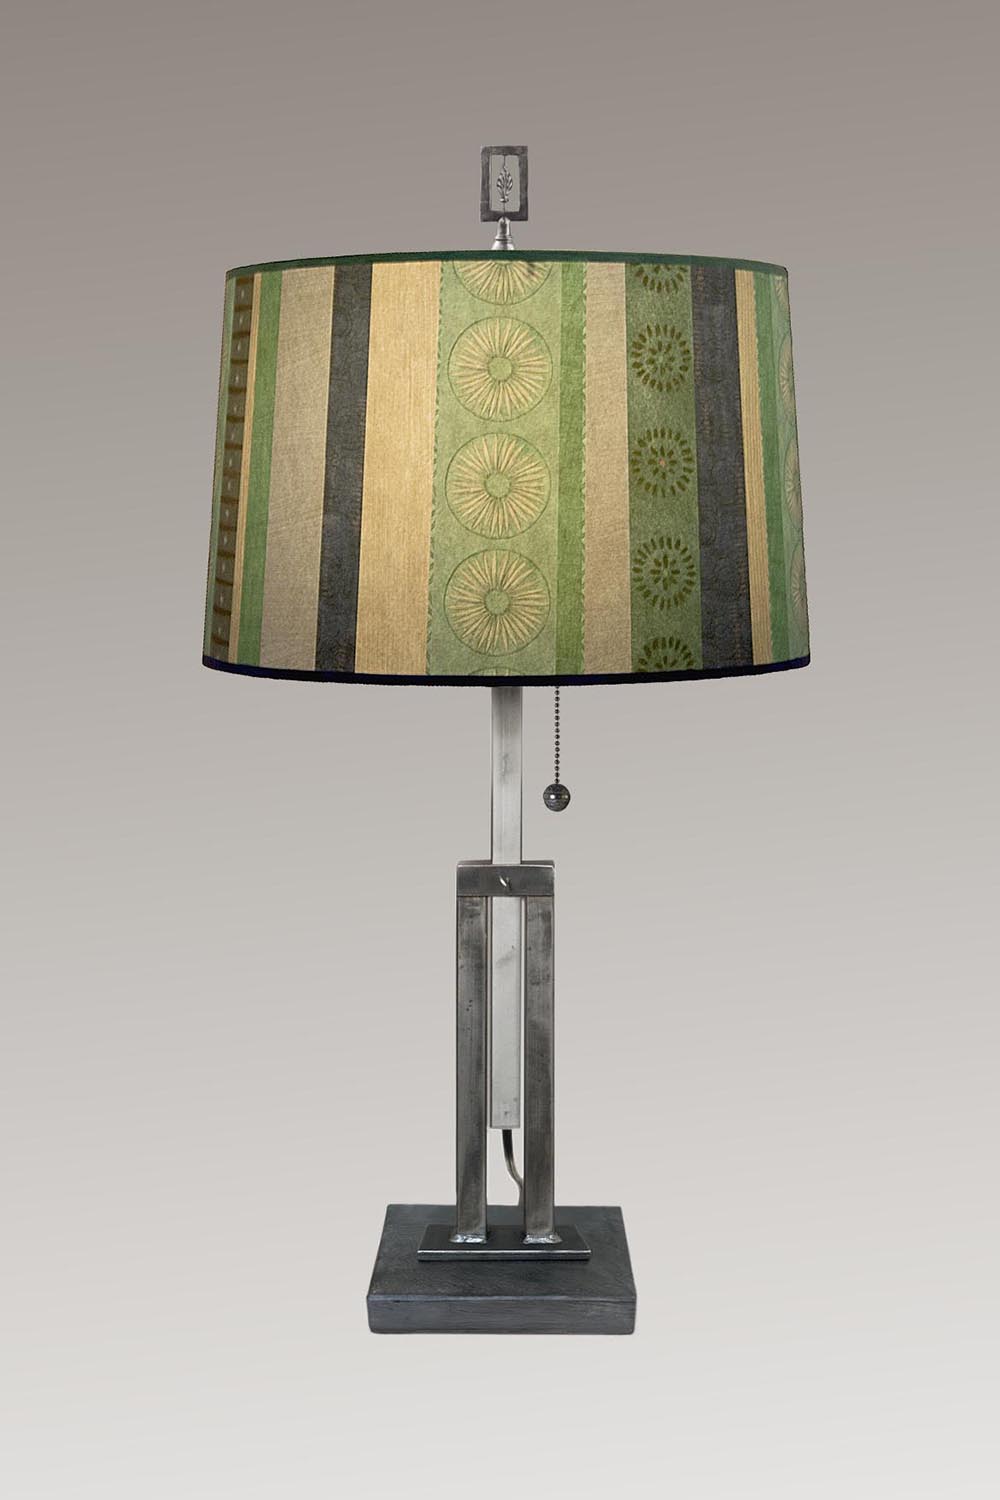 Janna Ugone & Co Table Lamps Adjustable-Height Steel Table Lamp with Large Drum Shade in Serape Waters